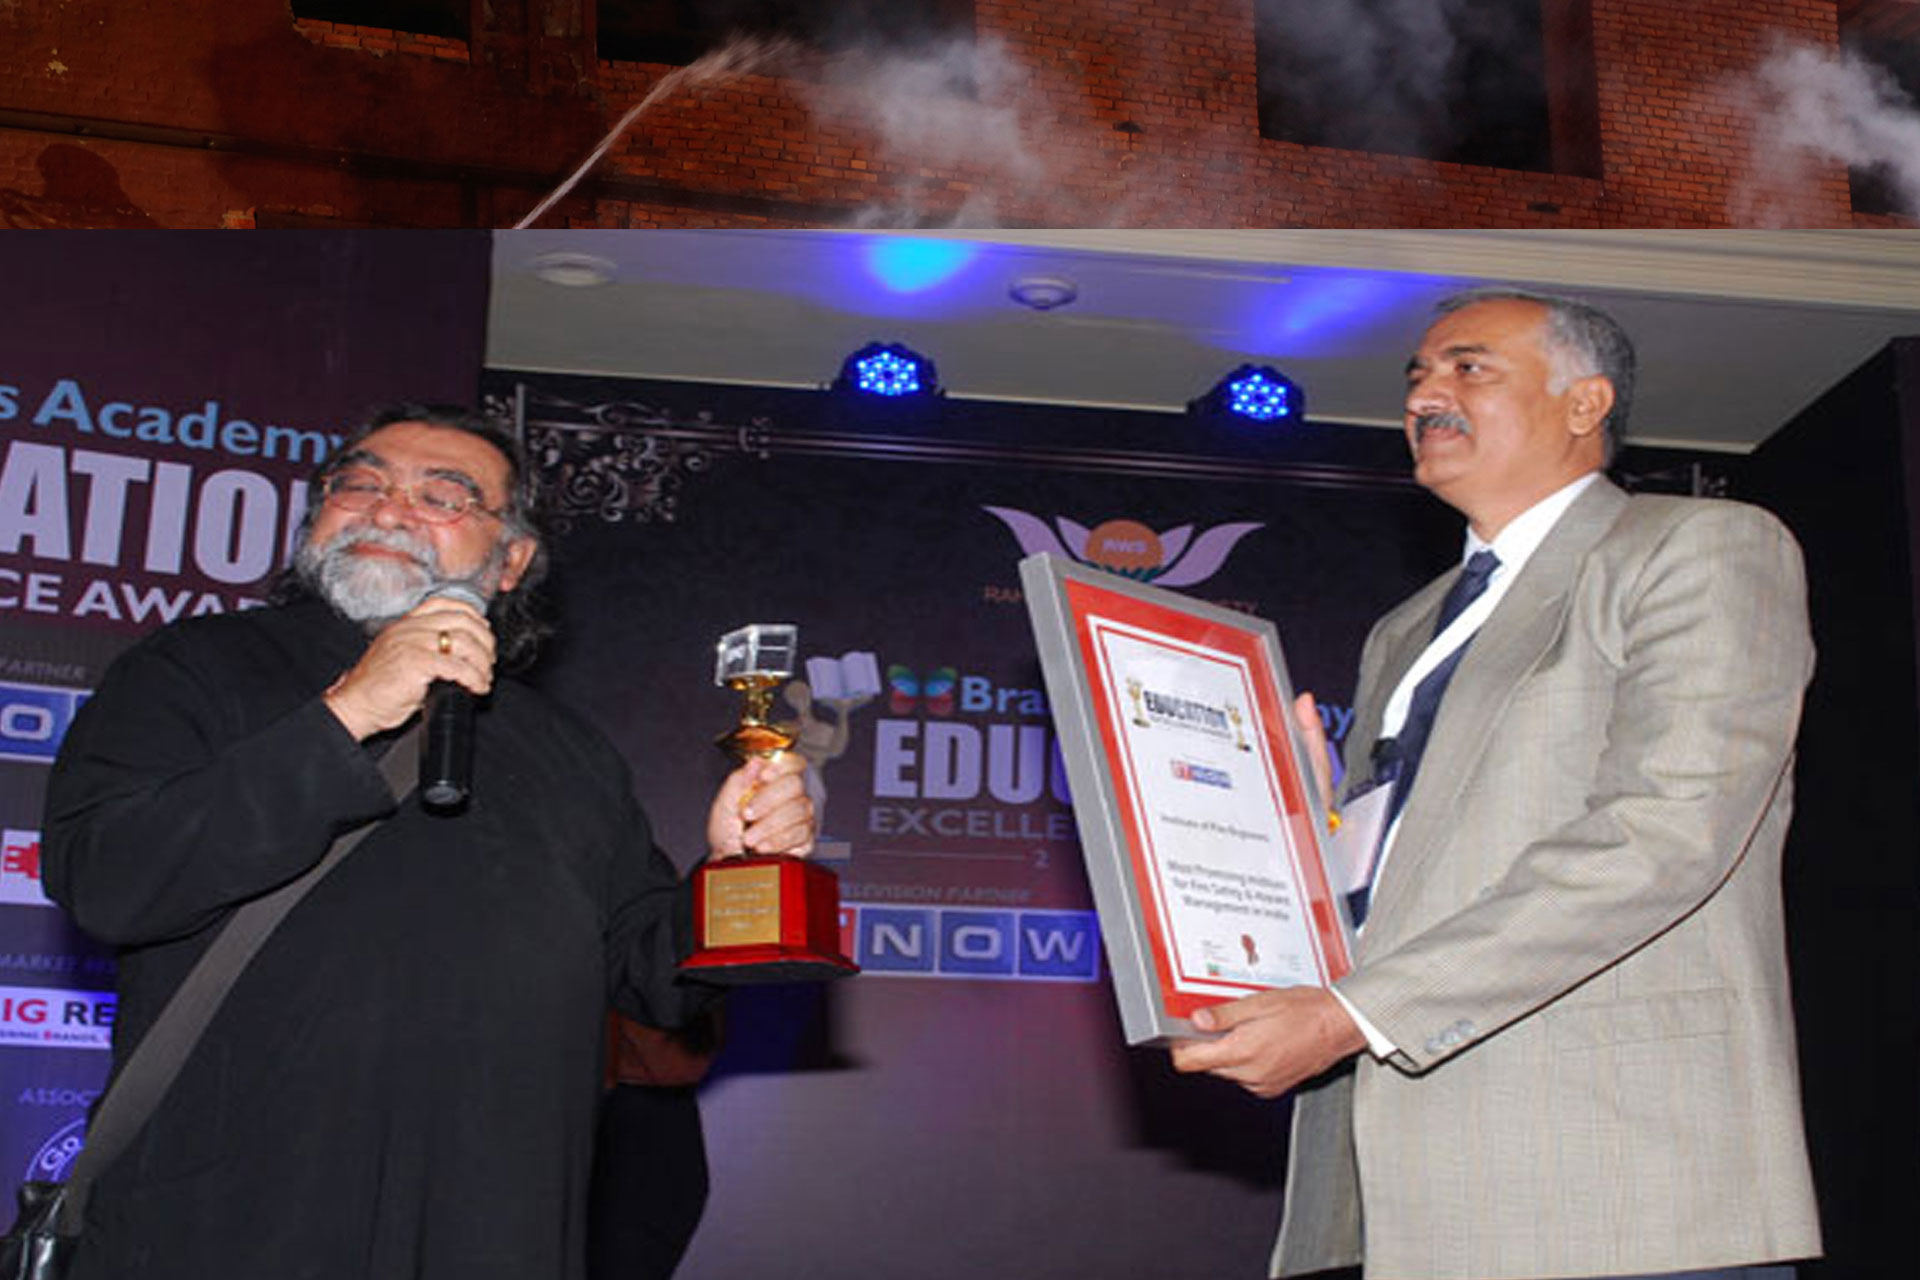 IFE Awarded the Brands Academy EDUCATION Excellence Awards 2013 in New Delhi